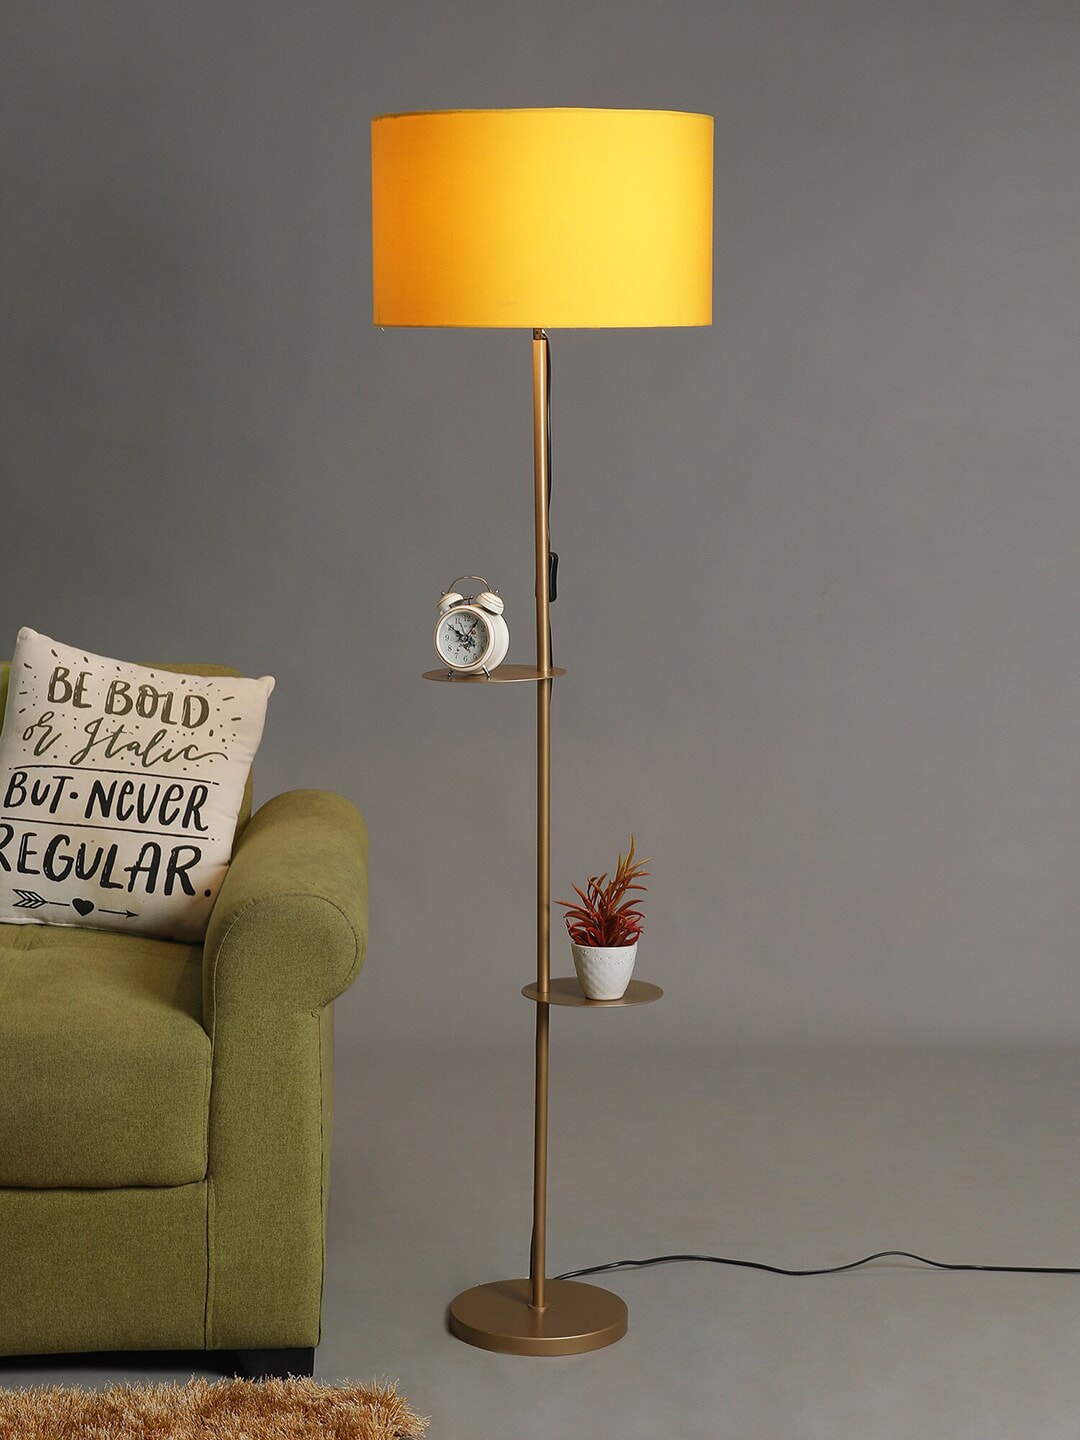 SANDED EDGE Yellow & Gold-Toned Cylindrical Shaped Metal Floor Lamp with Shade & Shelves Price in India